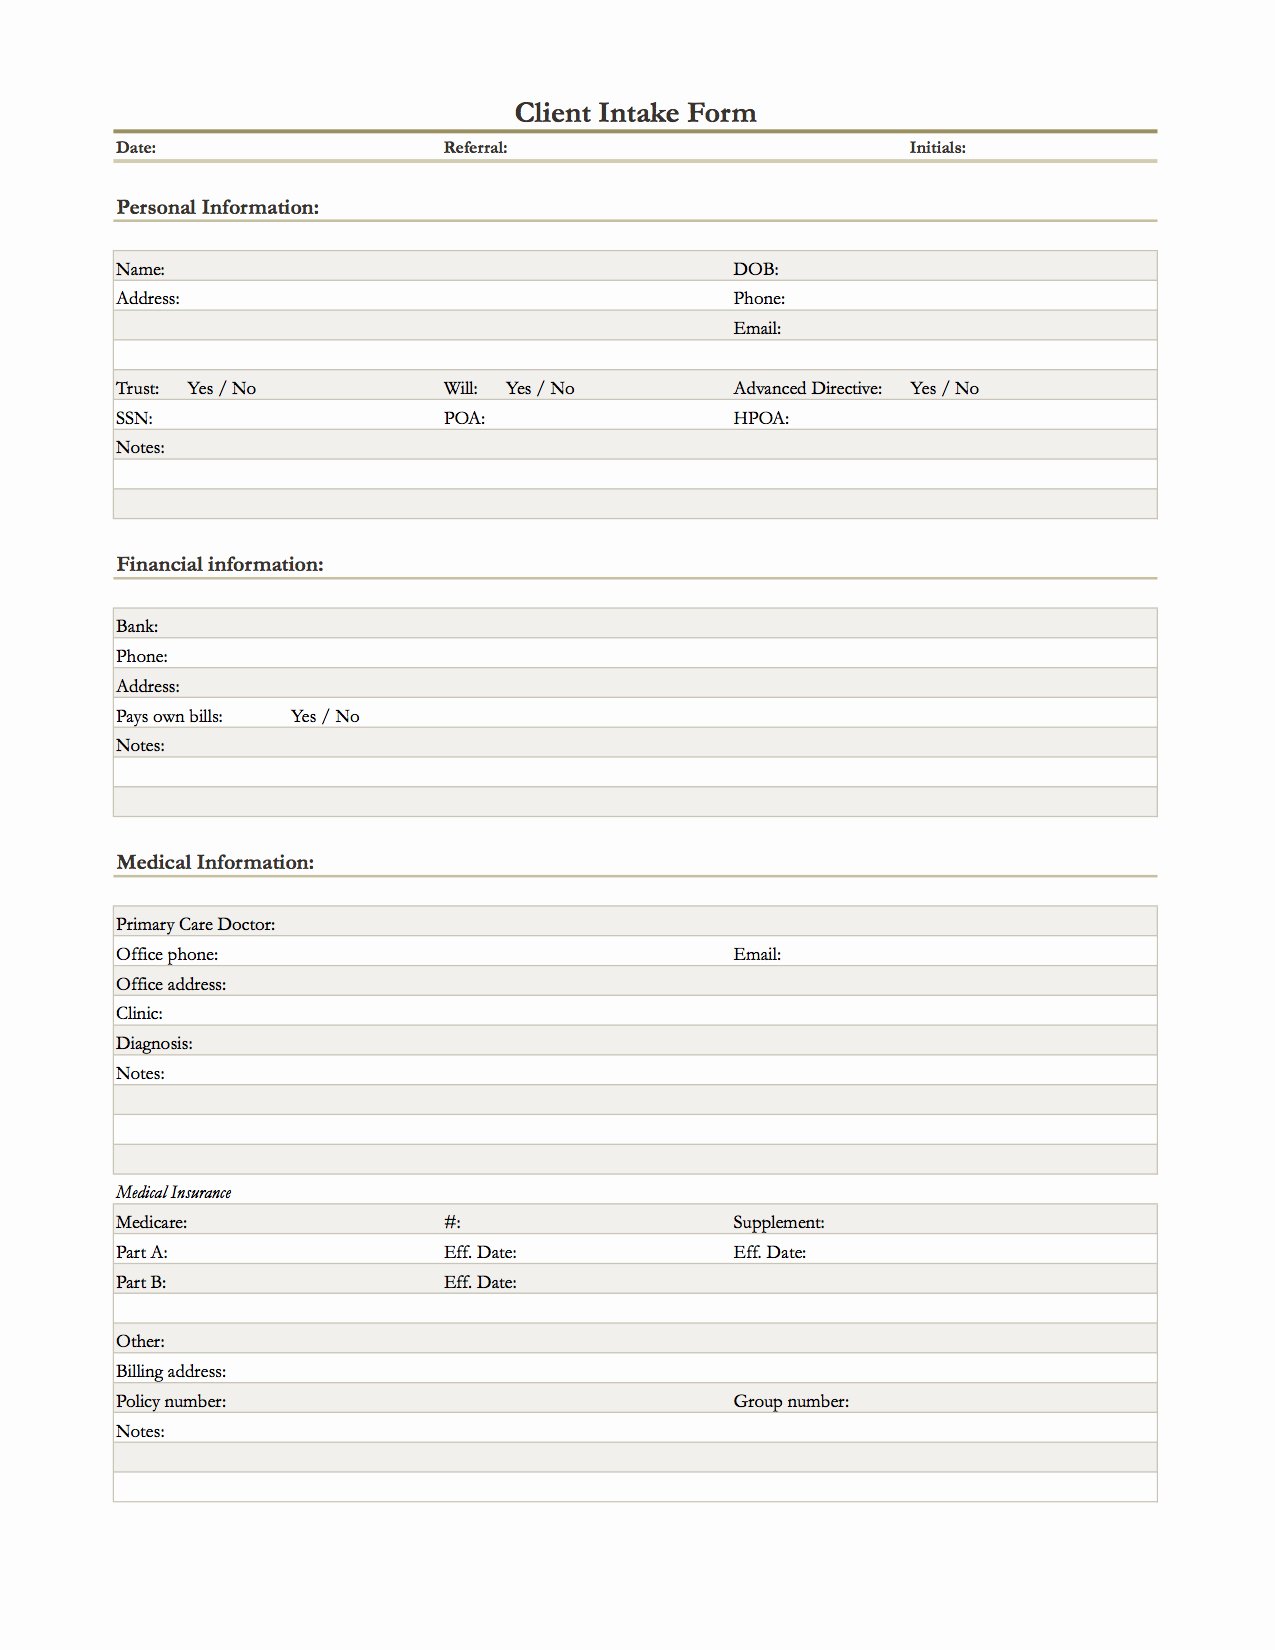 Client Intake form Template Inspirational Operational Templates